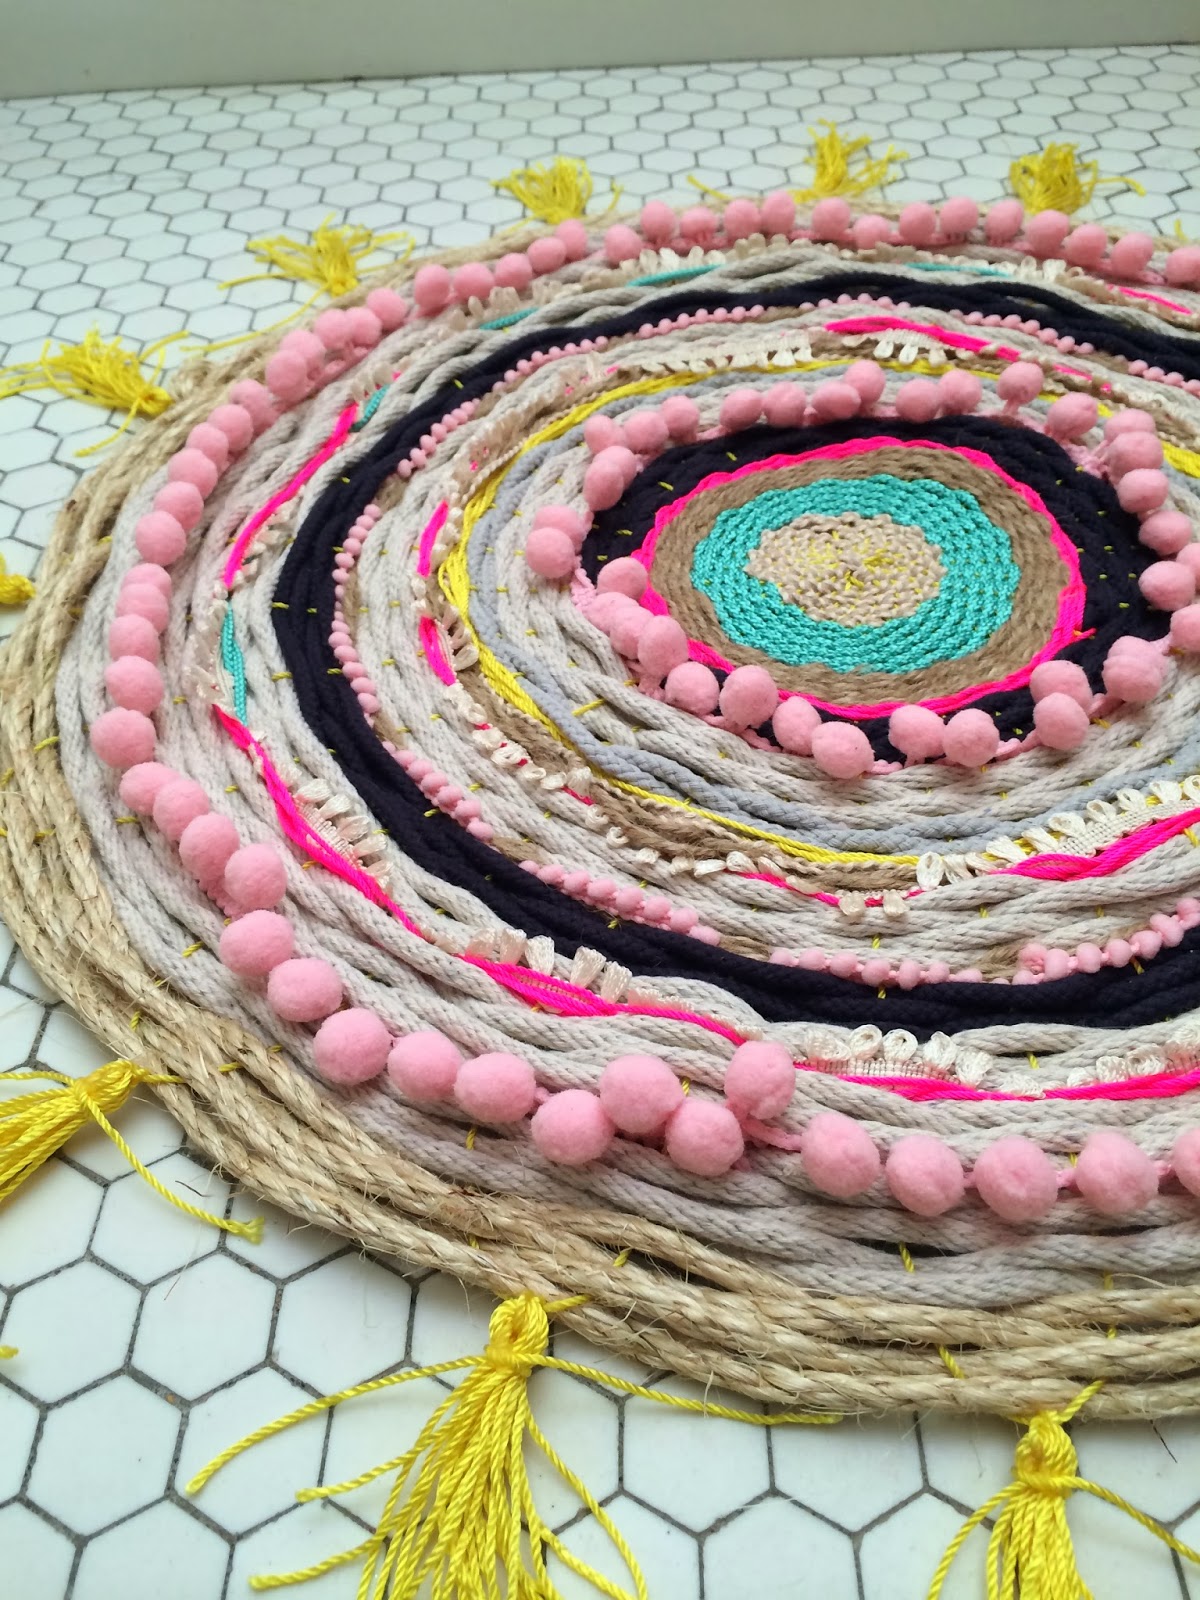 How to Make Your Own Rope Rug| Rope Rug, DIY Rope Rug, Easy Rope Projects, How to Make Your Own Rope Rug, Rope Rug DIY Projects, Repurpose Rope, How to Repurpose Rope, Popular Pin #RopeRug #DIY